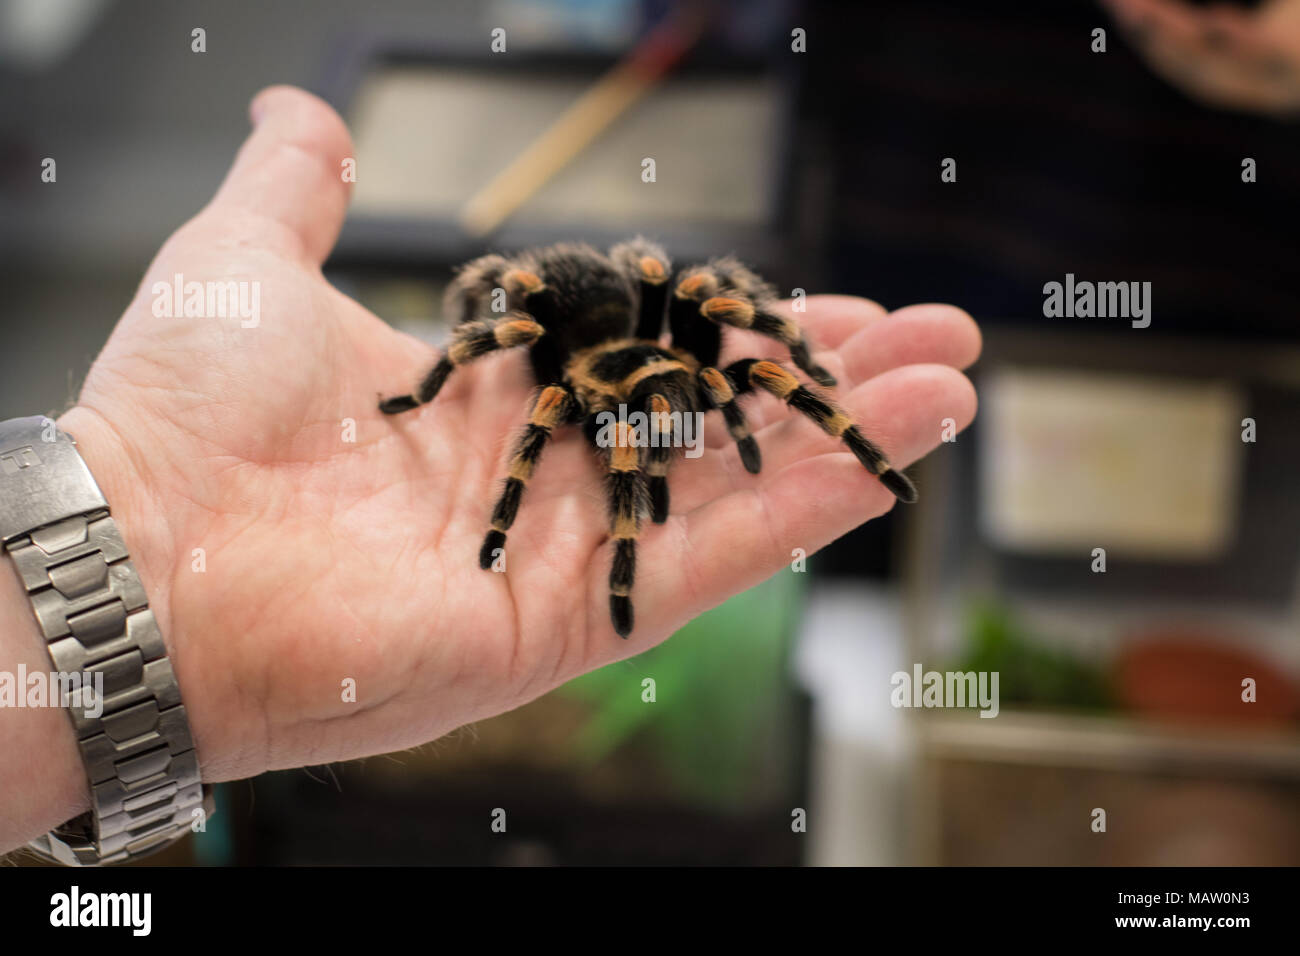 Mexican redknee tarantula in a woman's hand Stock Photo